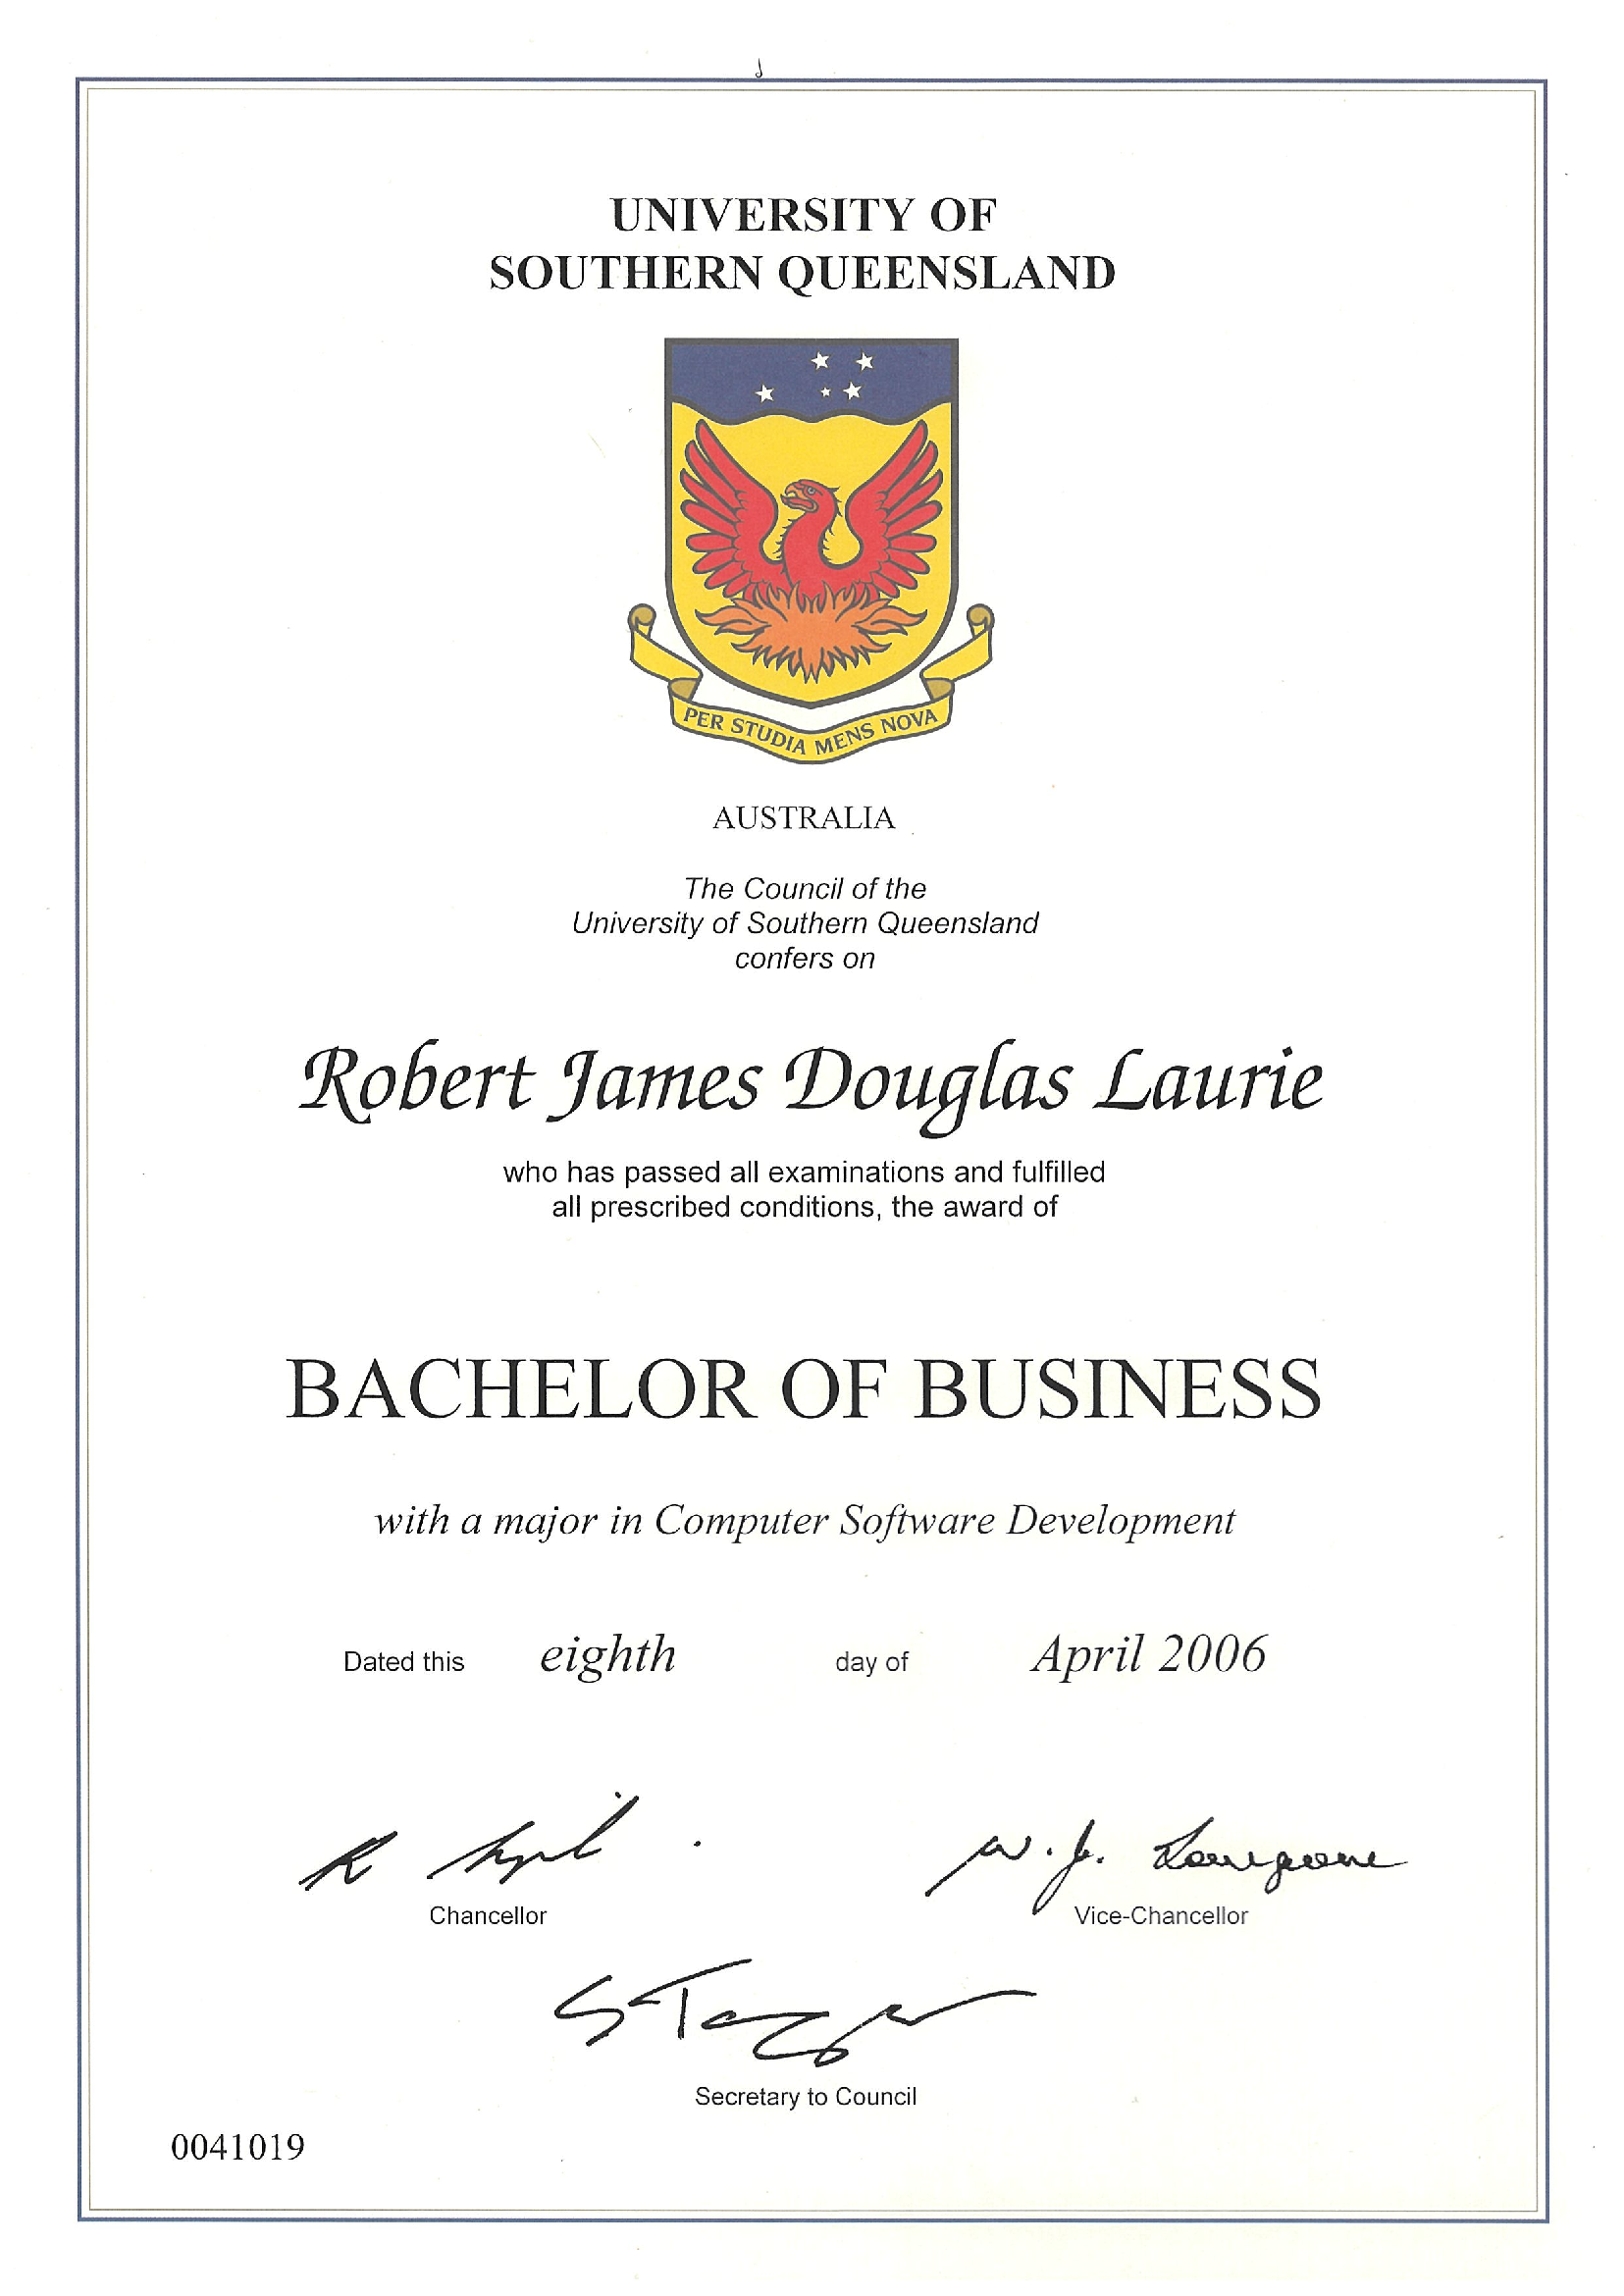 Bachelor of Business Certificate.